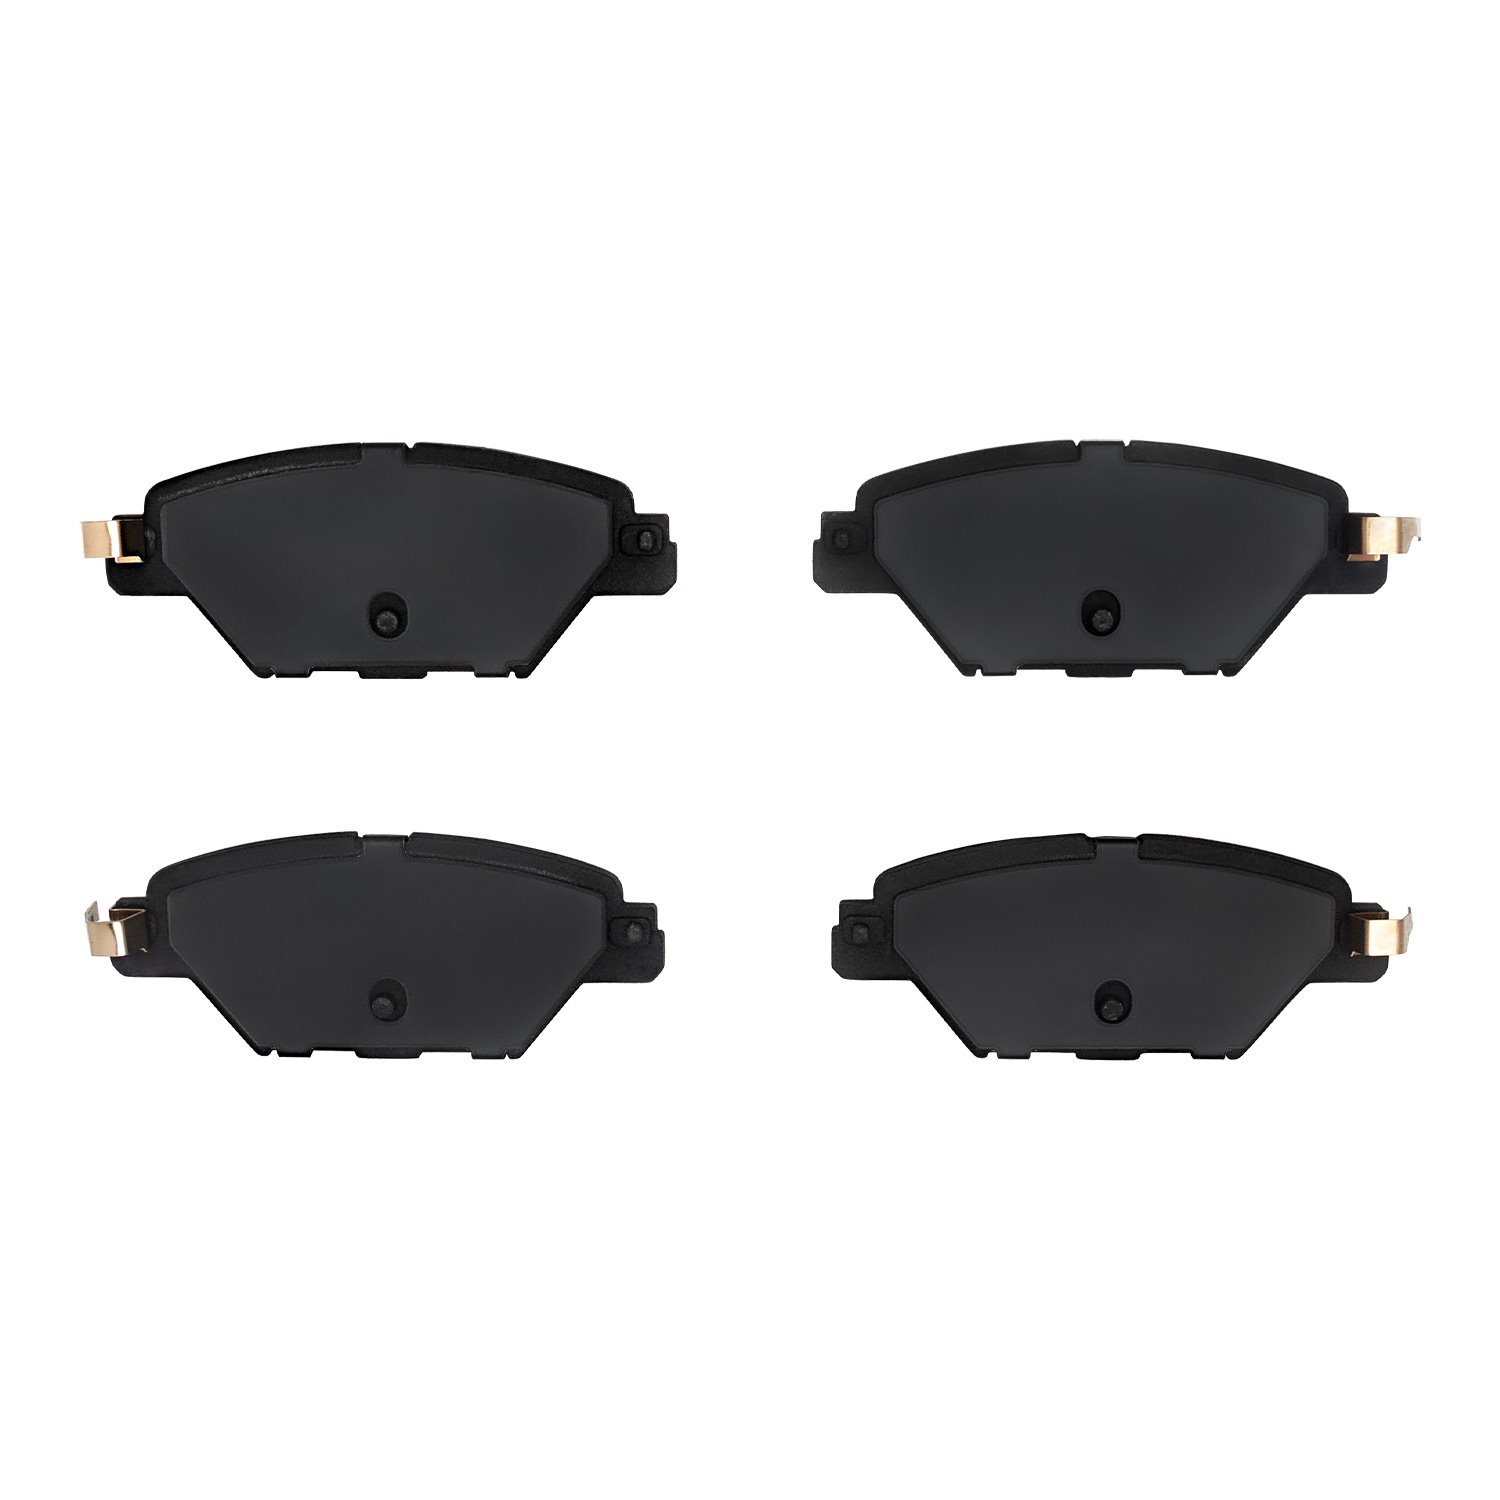 1310-1934-00 3000-Series Ceramic Brake Pads, Fits Select Ford/Lincoln/Mercury/Mazda, Position: Rear